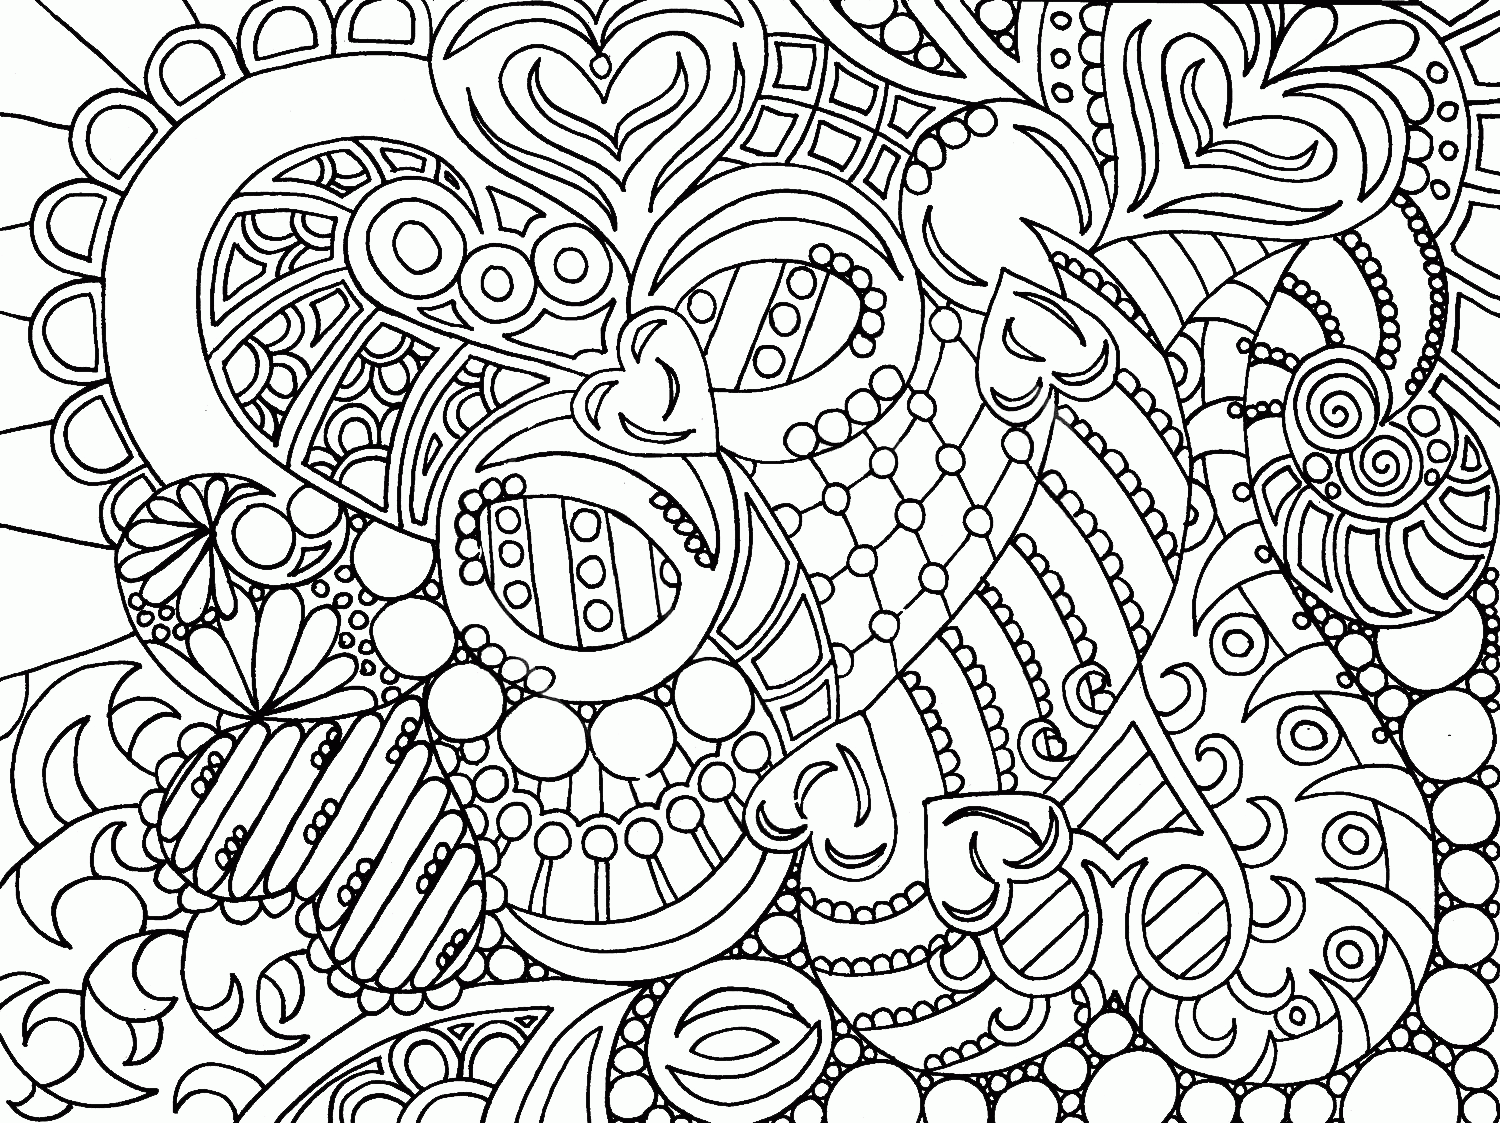 Printable For Adults Only - Coloring Pages for Kids and for Adults